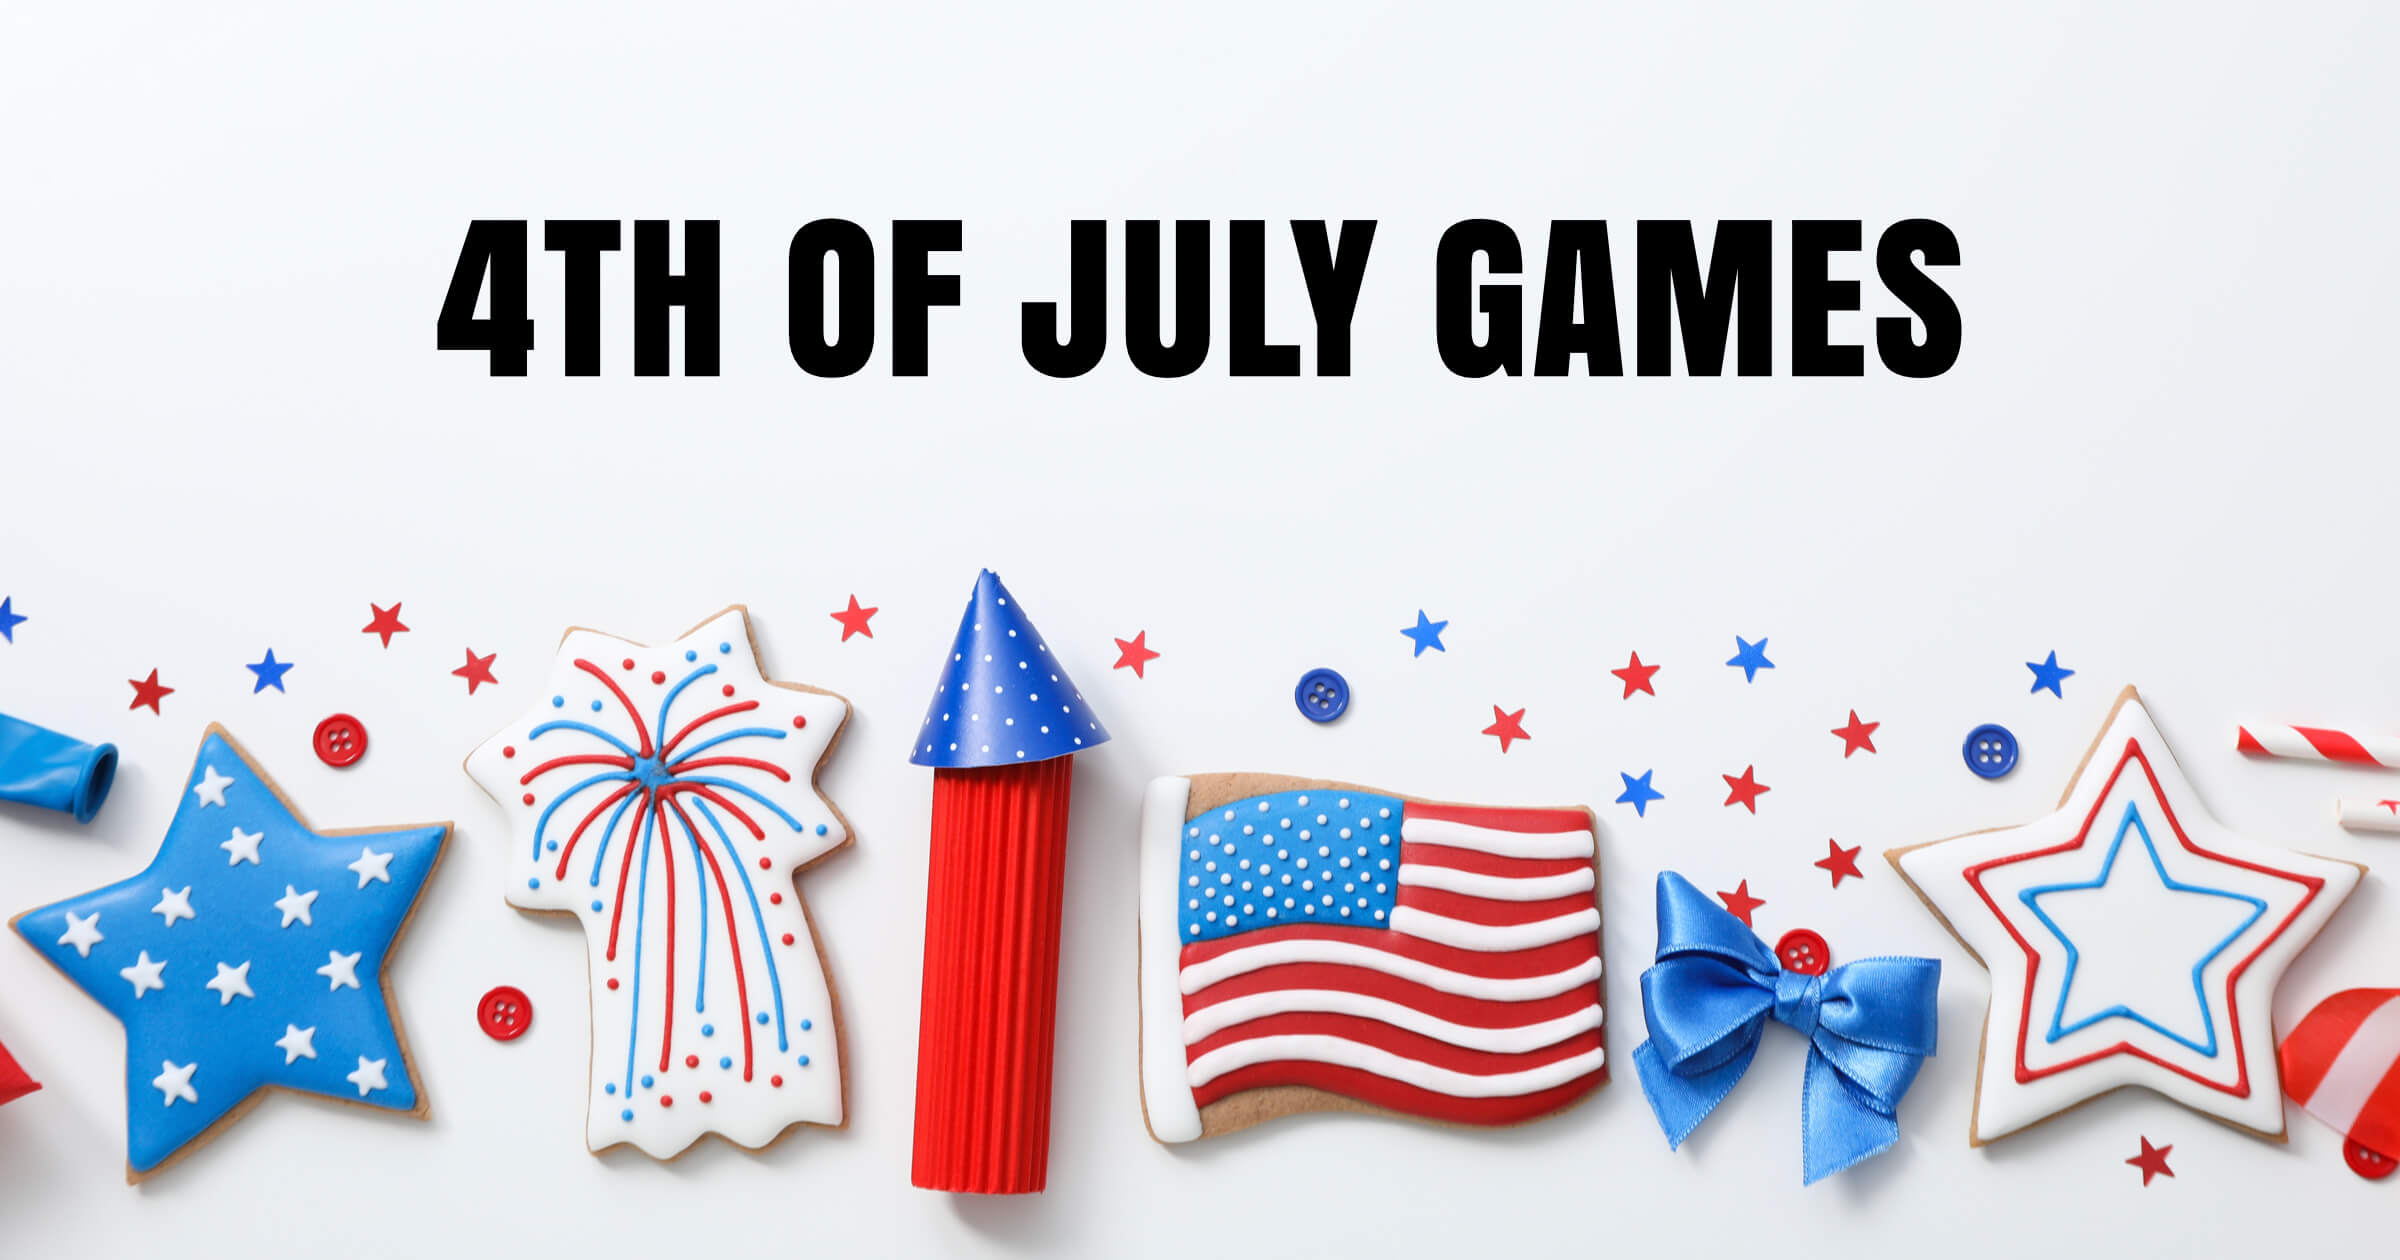 4 of July Games